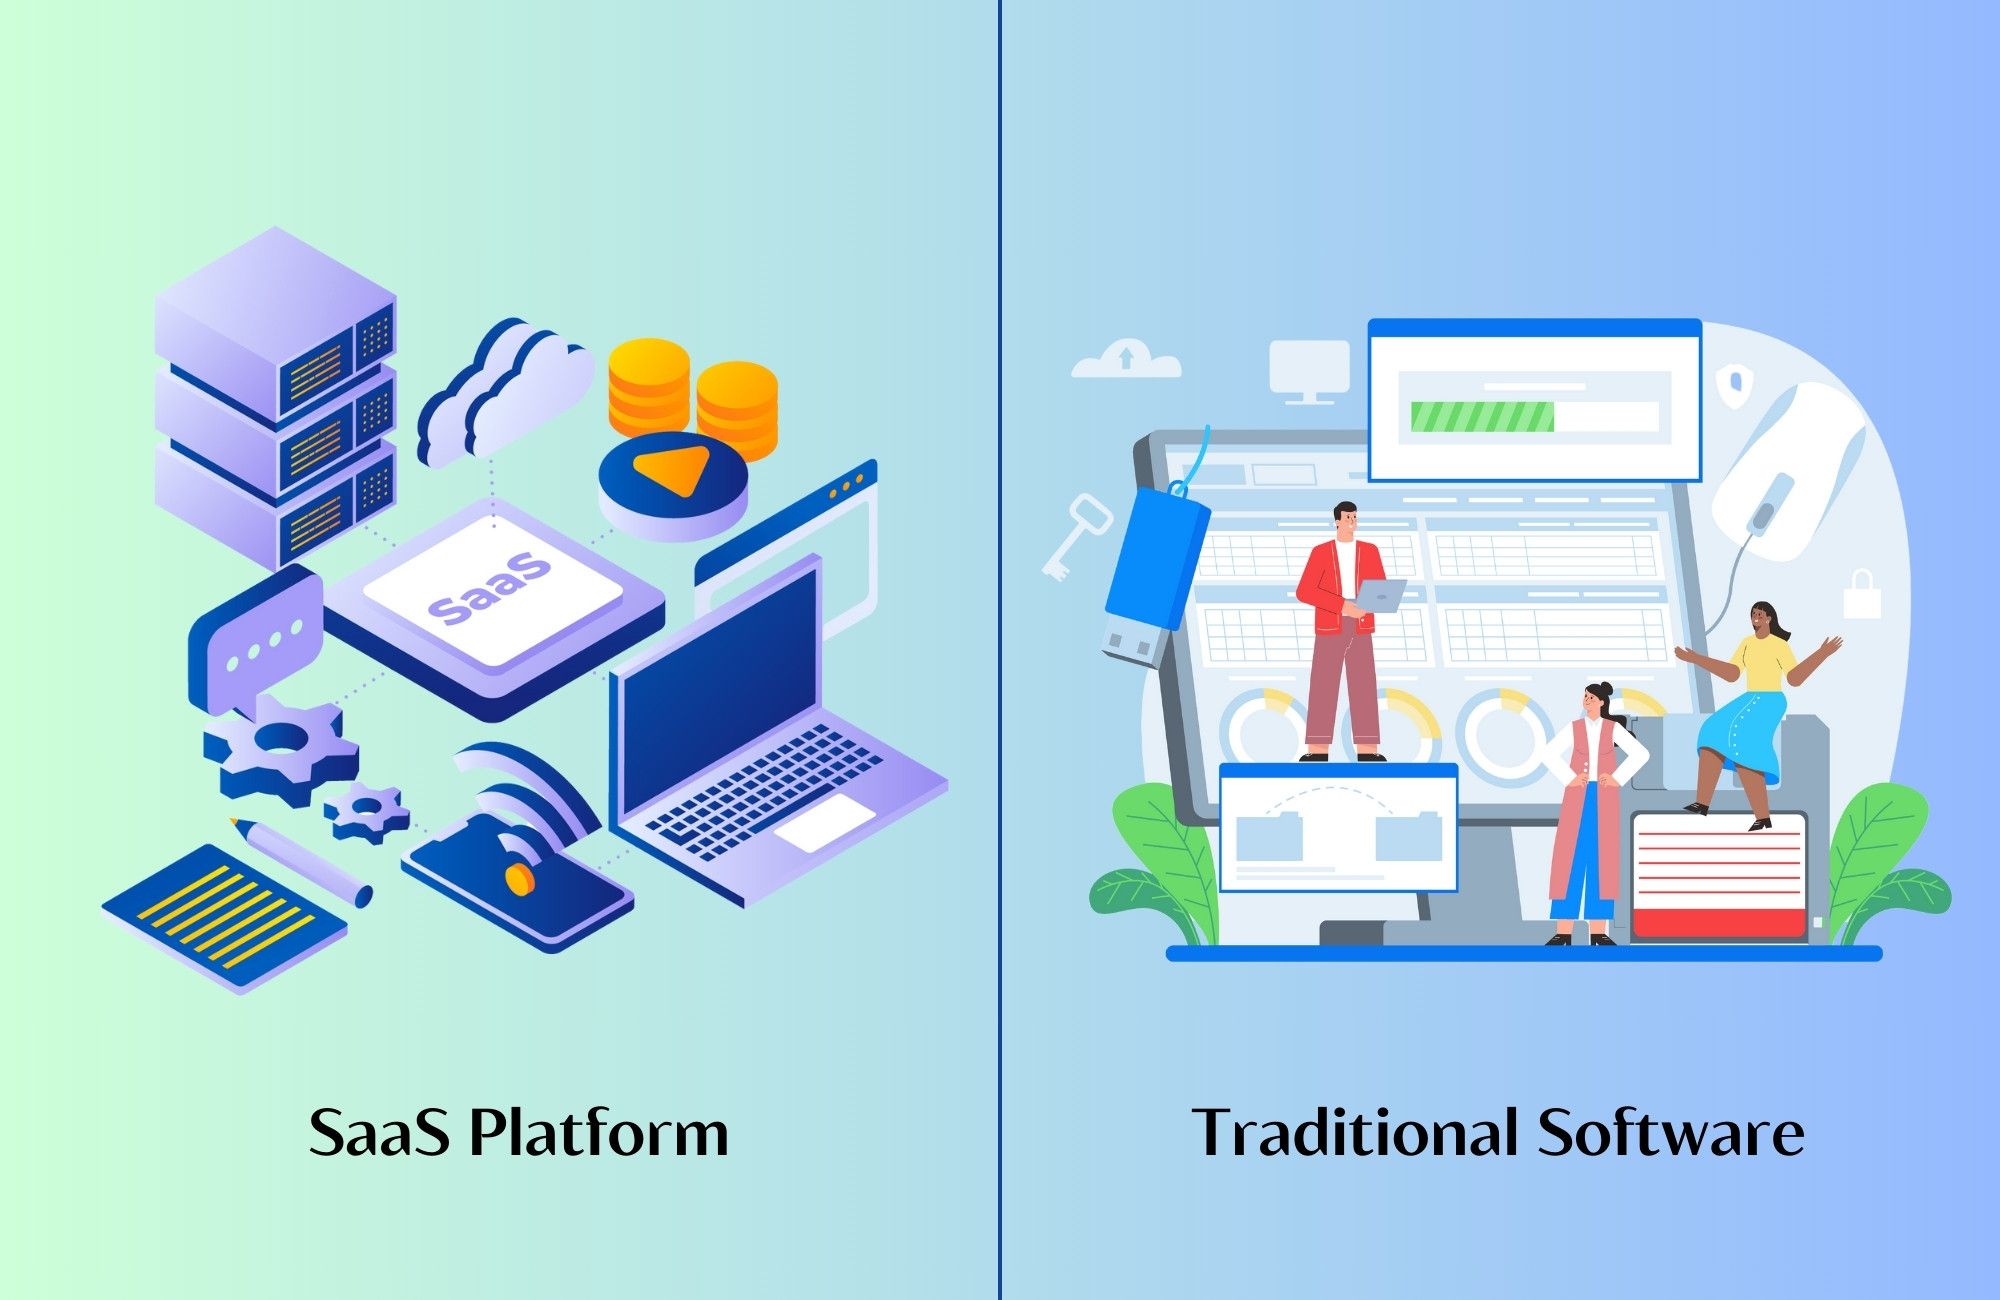 The choice between SaaS and traditional software depends on your business's demands